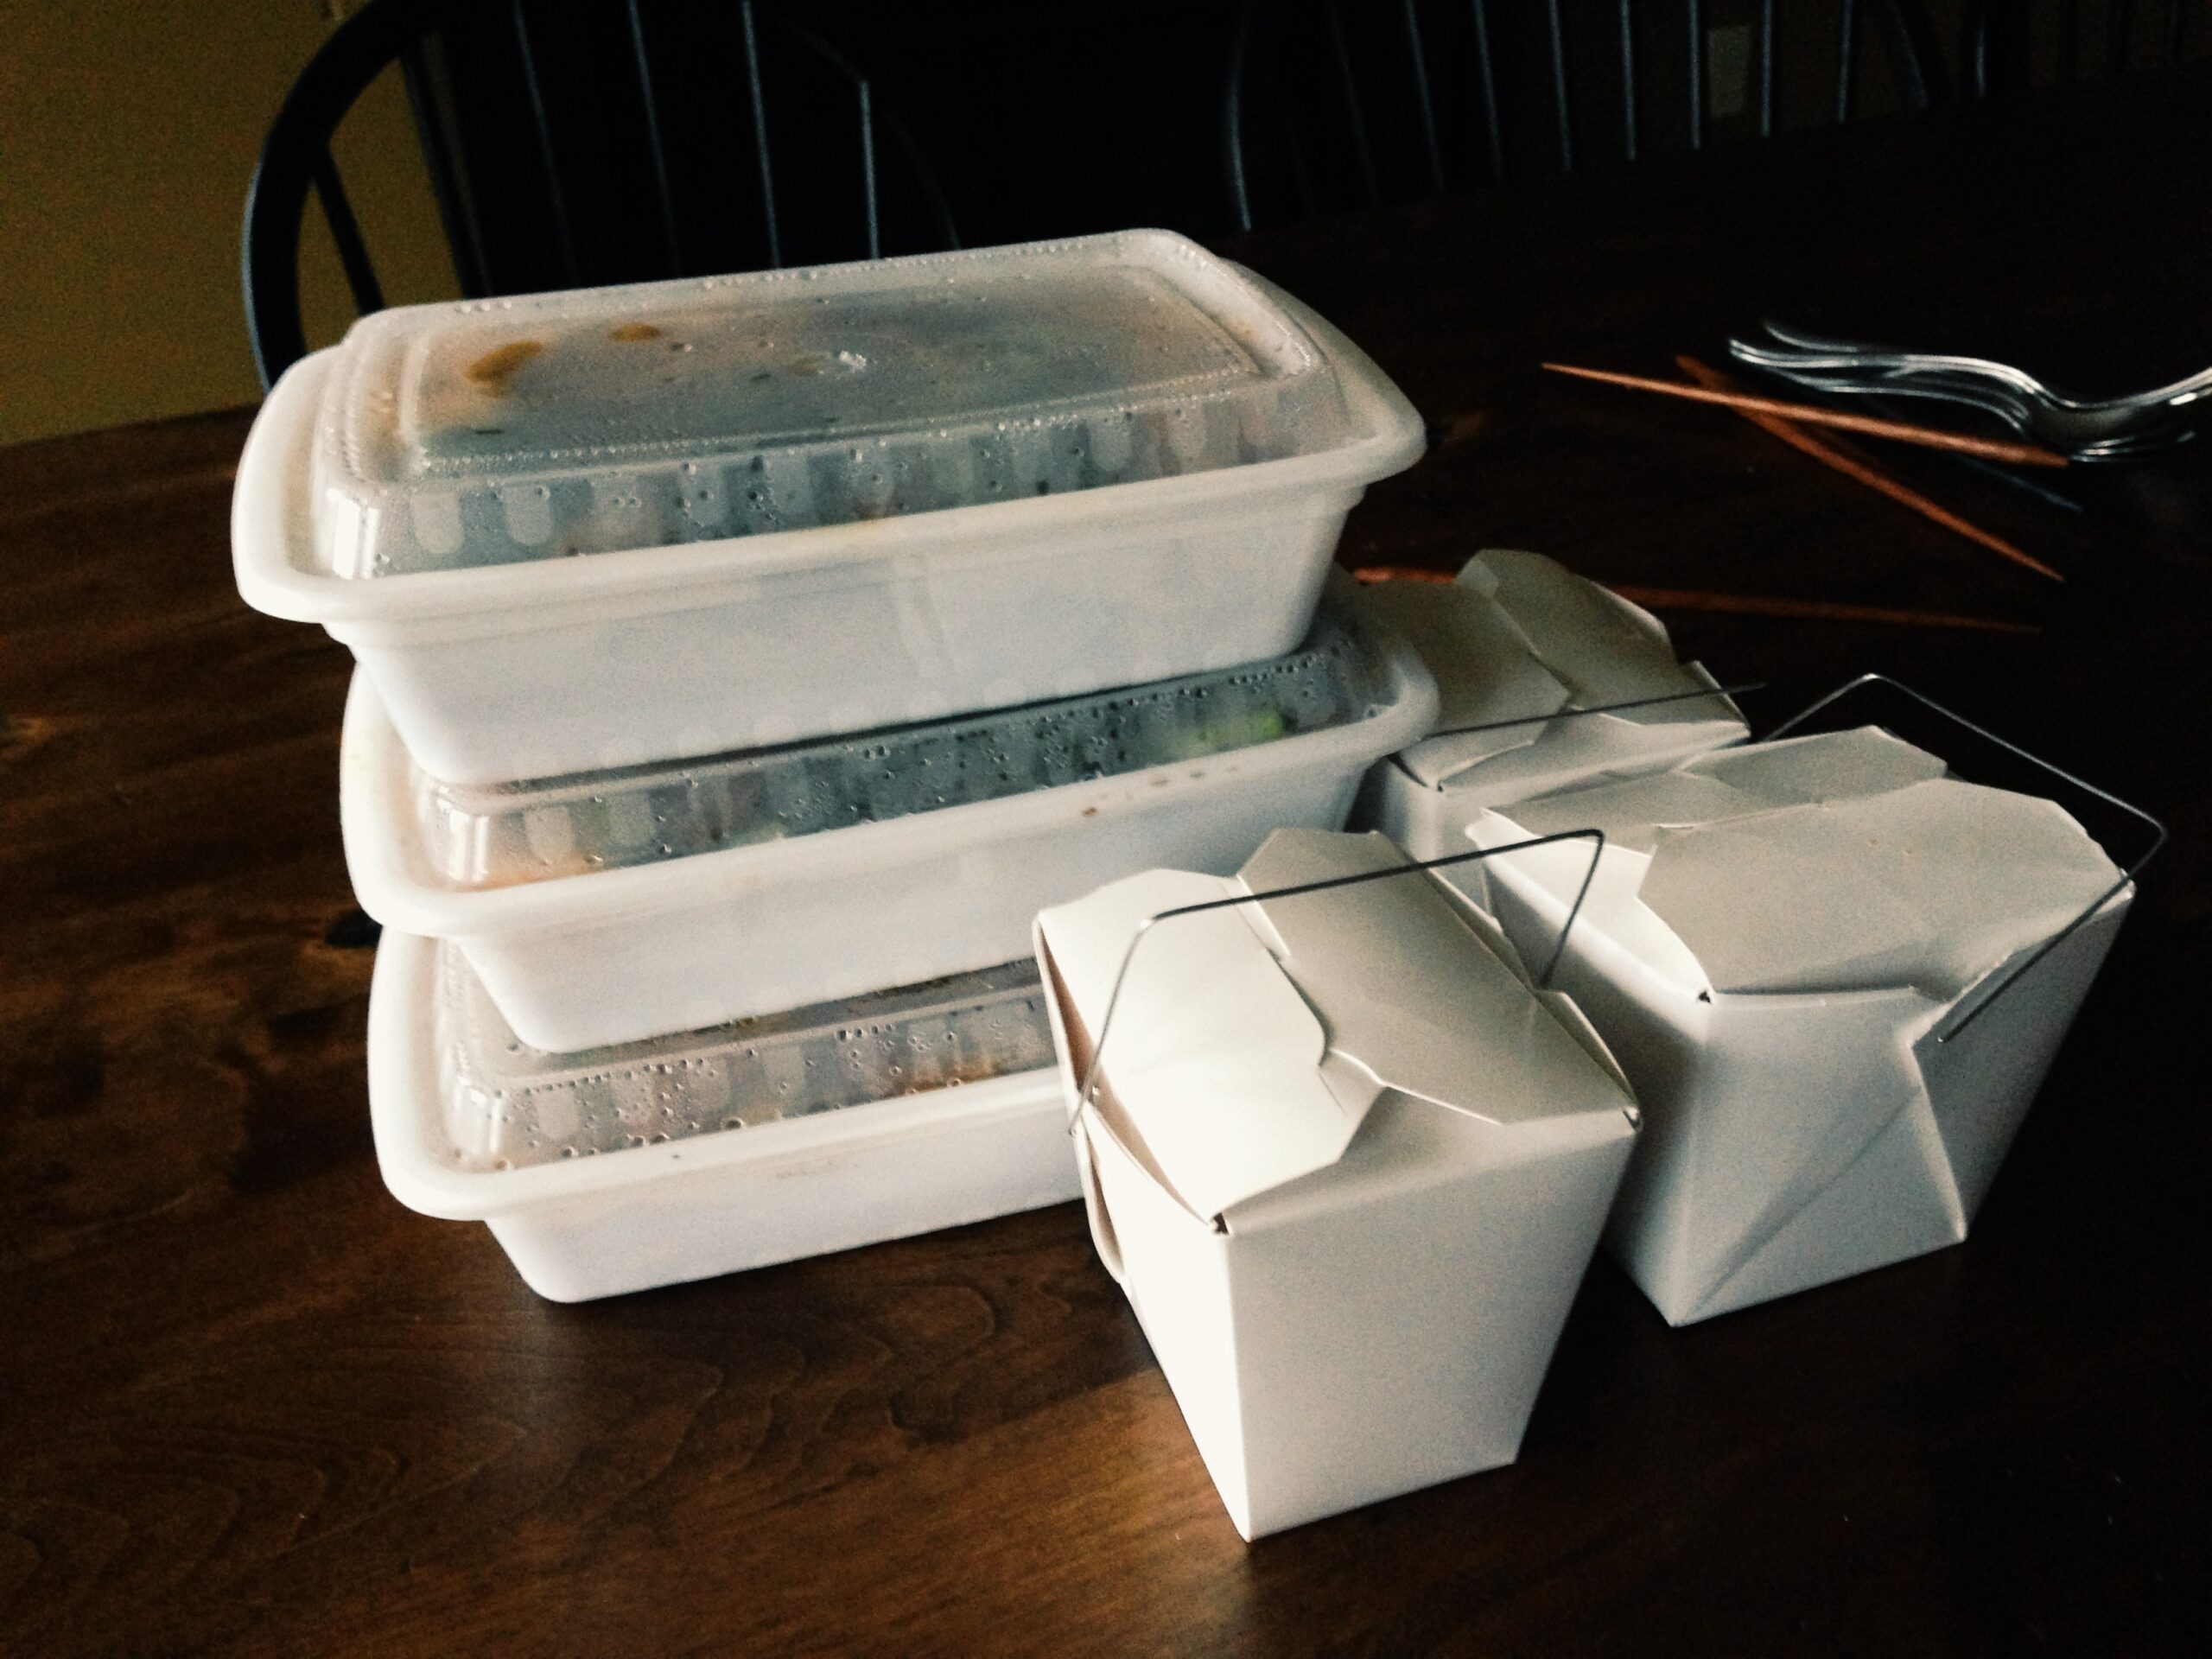 In the foreground there are two plastic takeout rice boxes, behind them a stack of three sturdy plastic takeout containers.